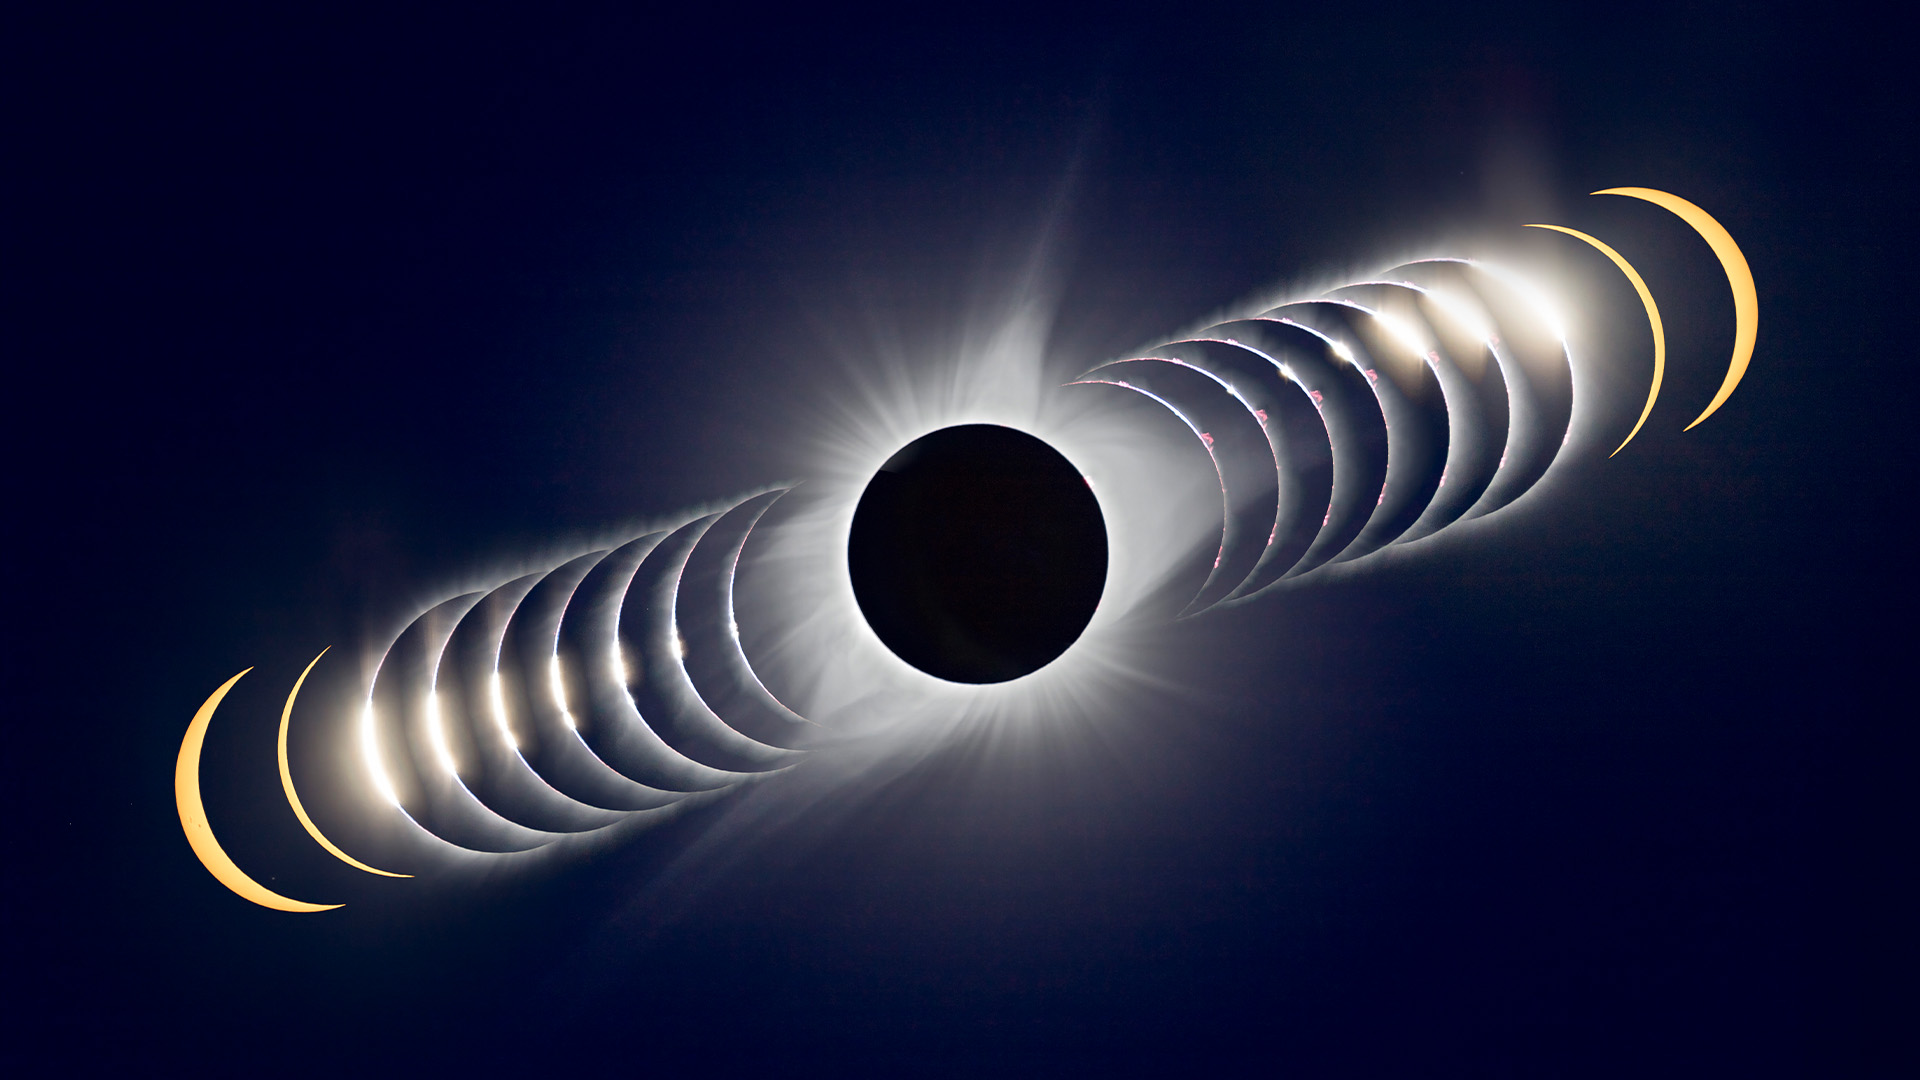 April 8 total solar eclipse: Everything you need to know